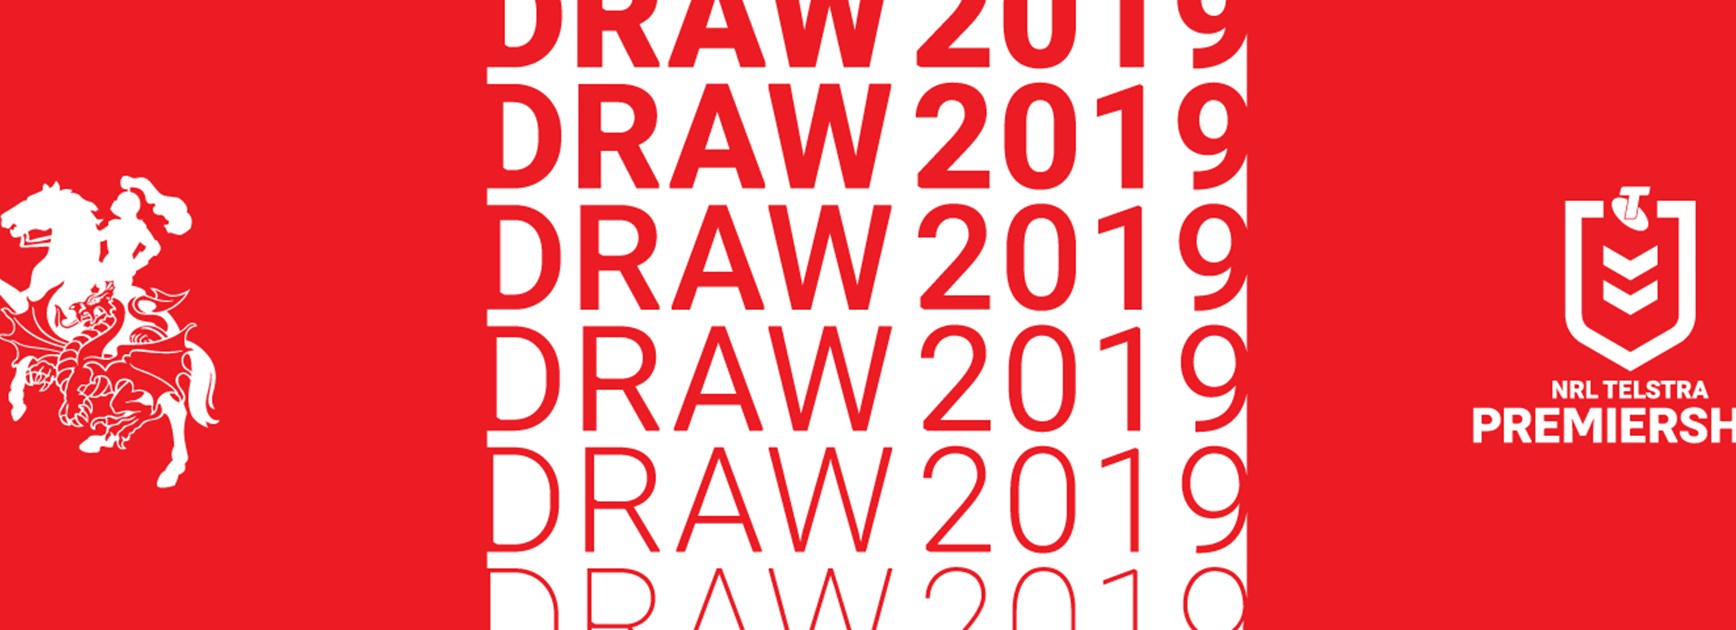 Dragons 2019 Draw Announced